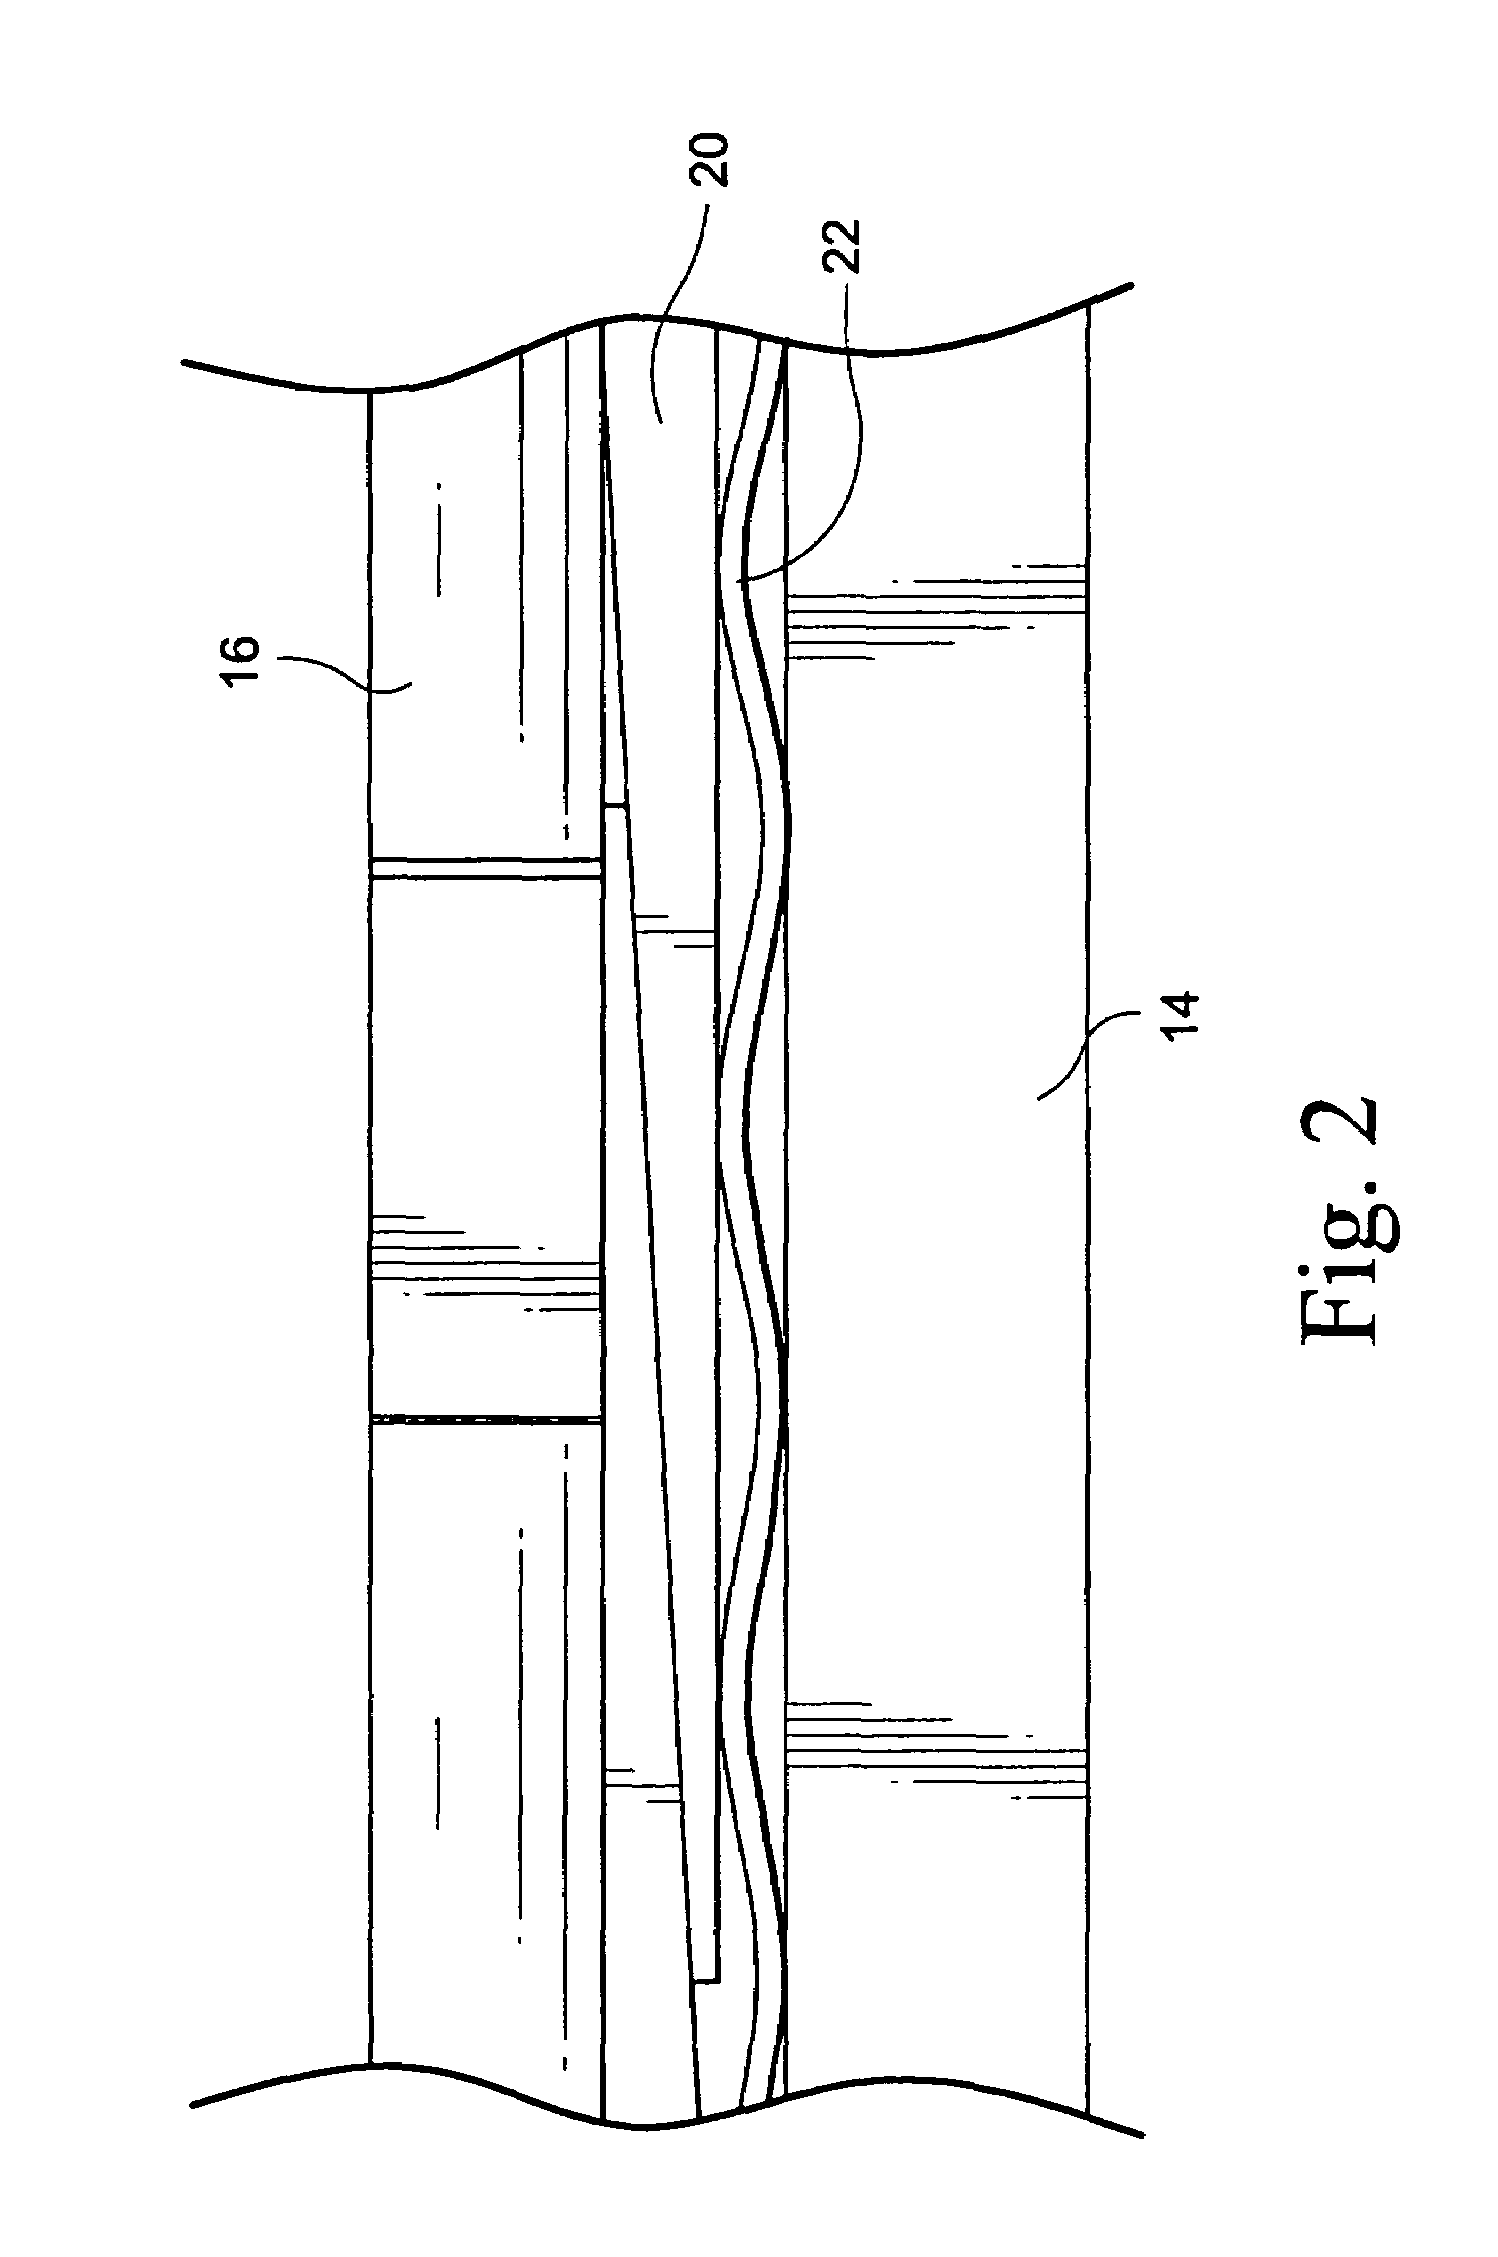 Apparatus for cutting and removing wedges of a stator core of an electrical machine